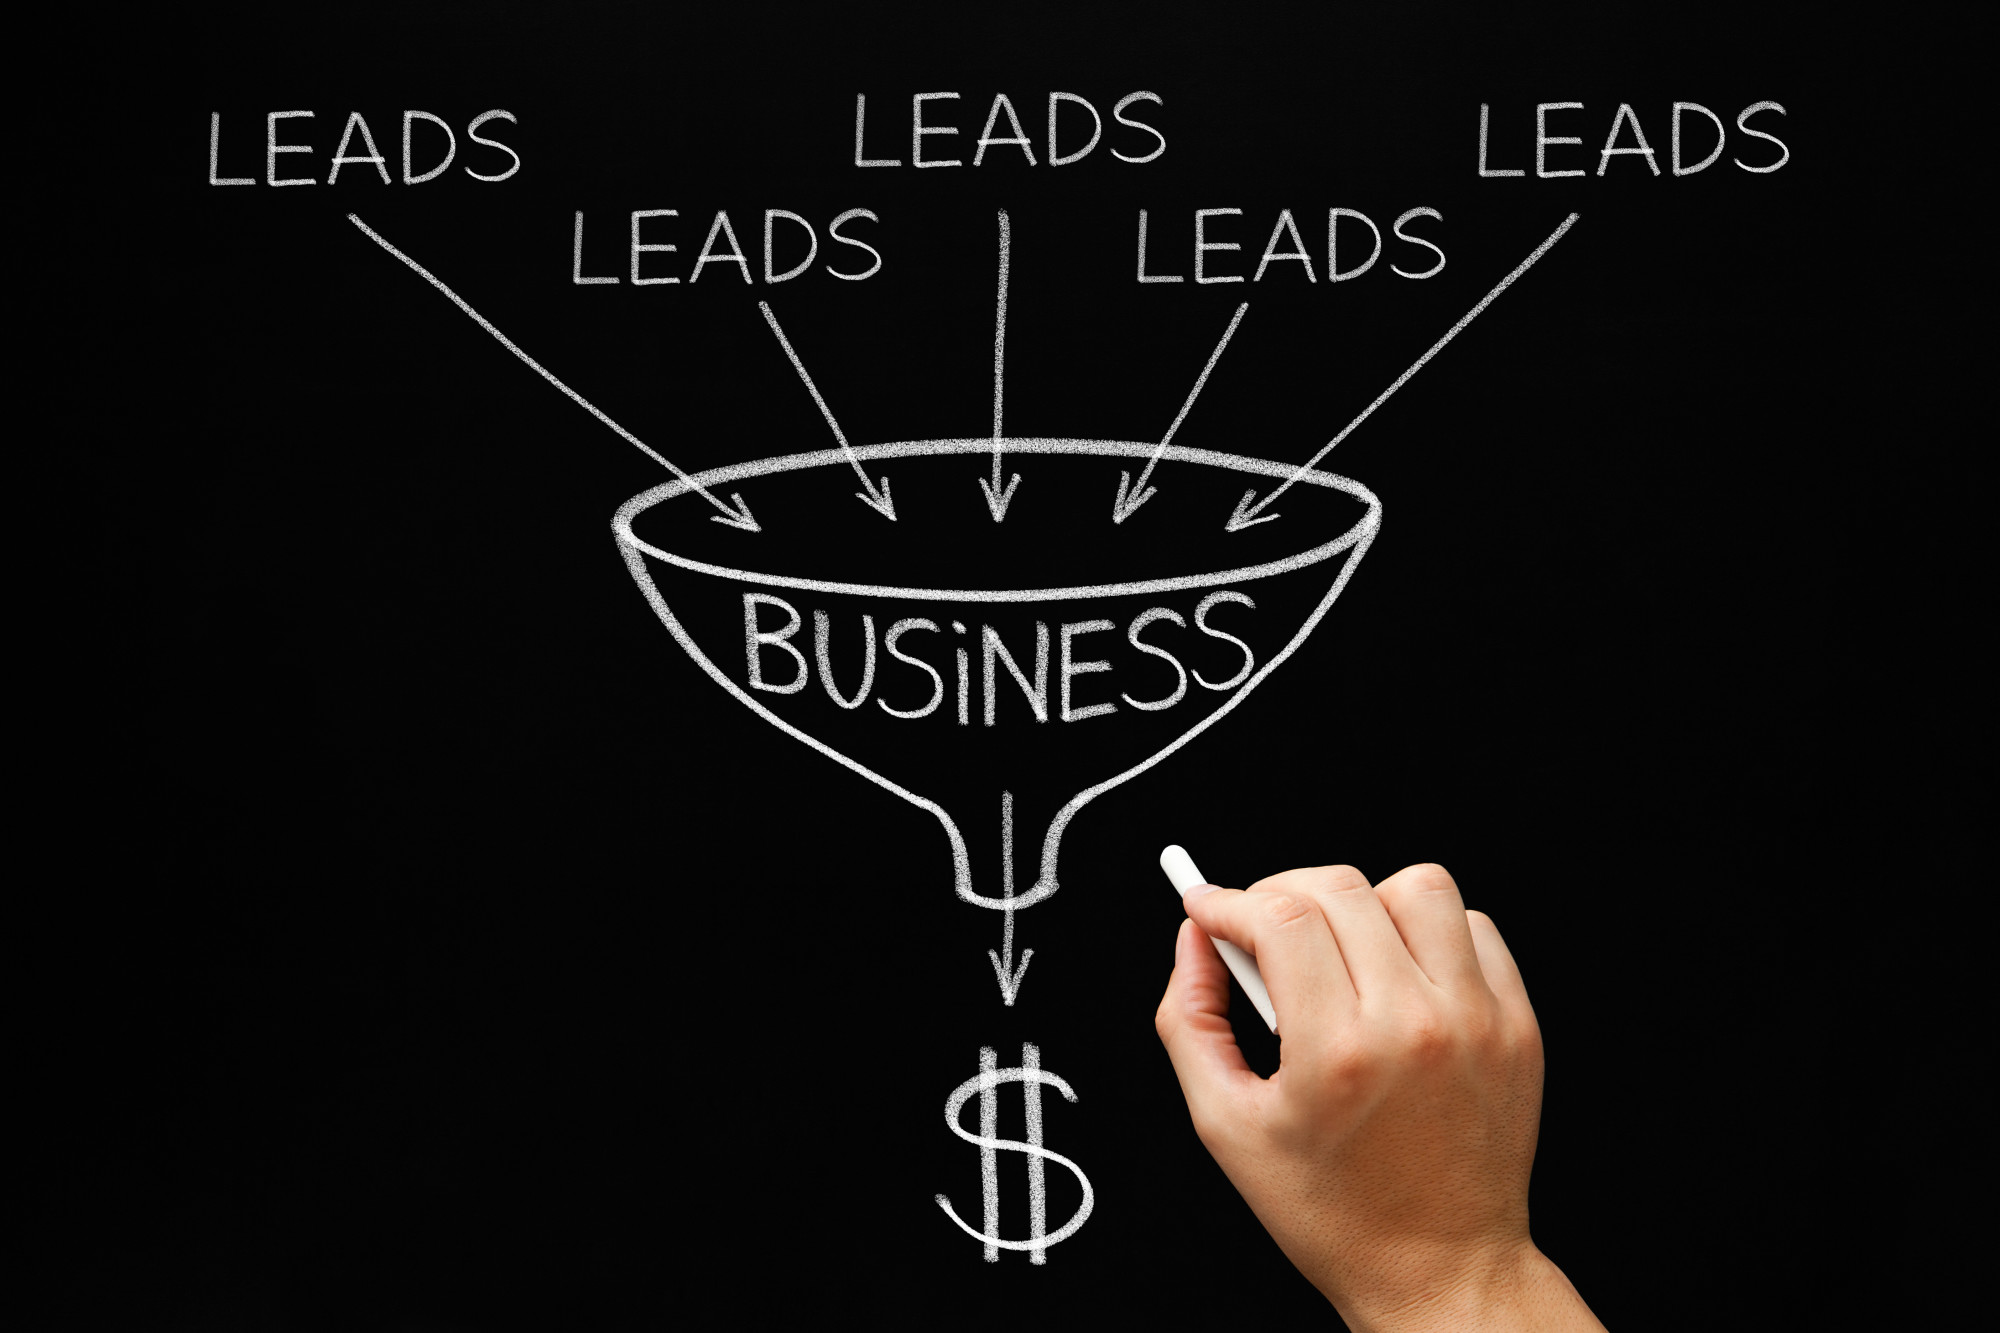 How to Find Leads for Your Small Business Online in 2019